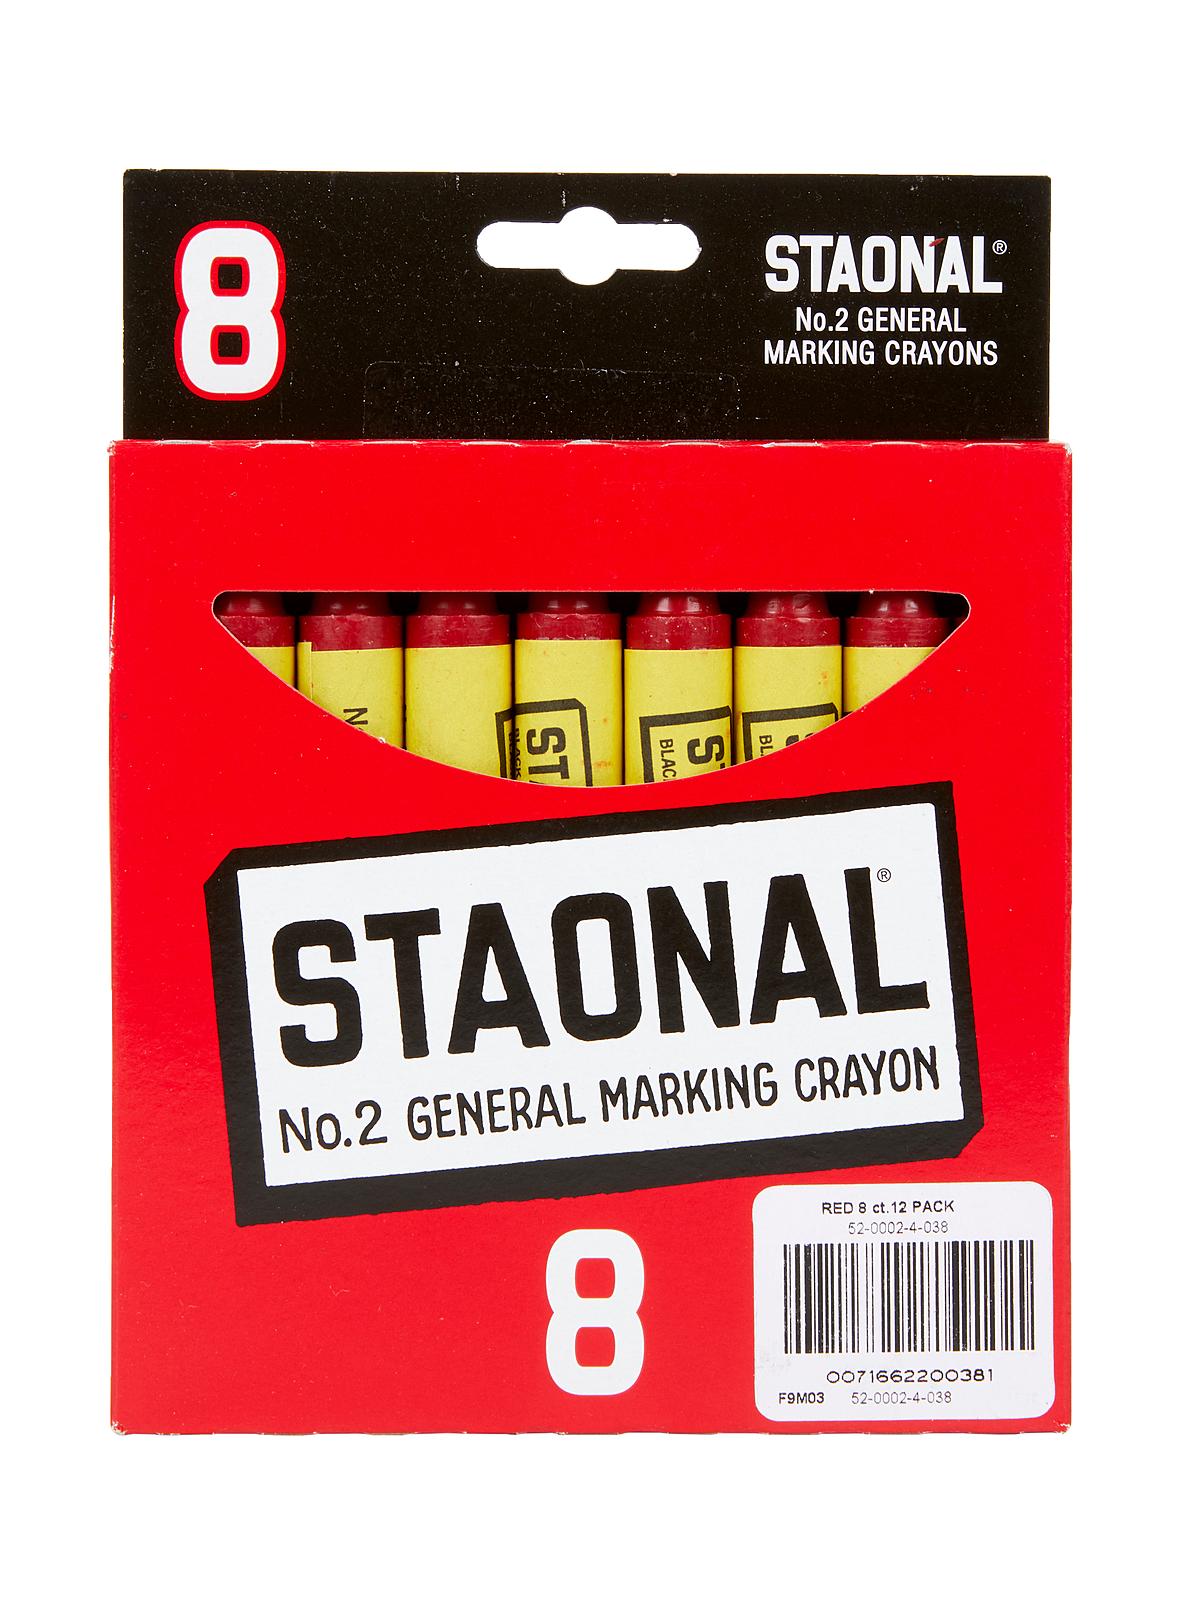 Staonal Extra Large Marking Crayons Red Box Of 8